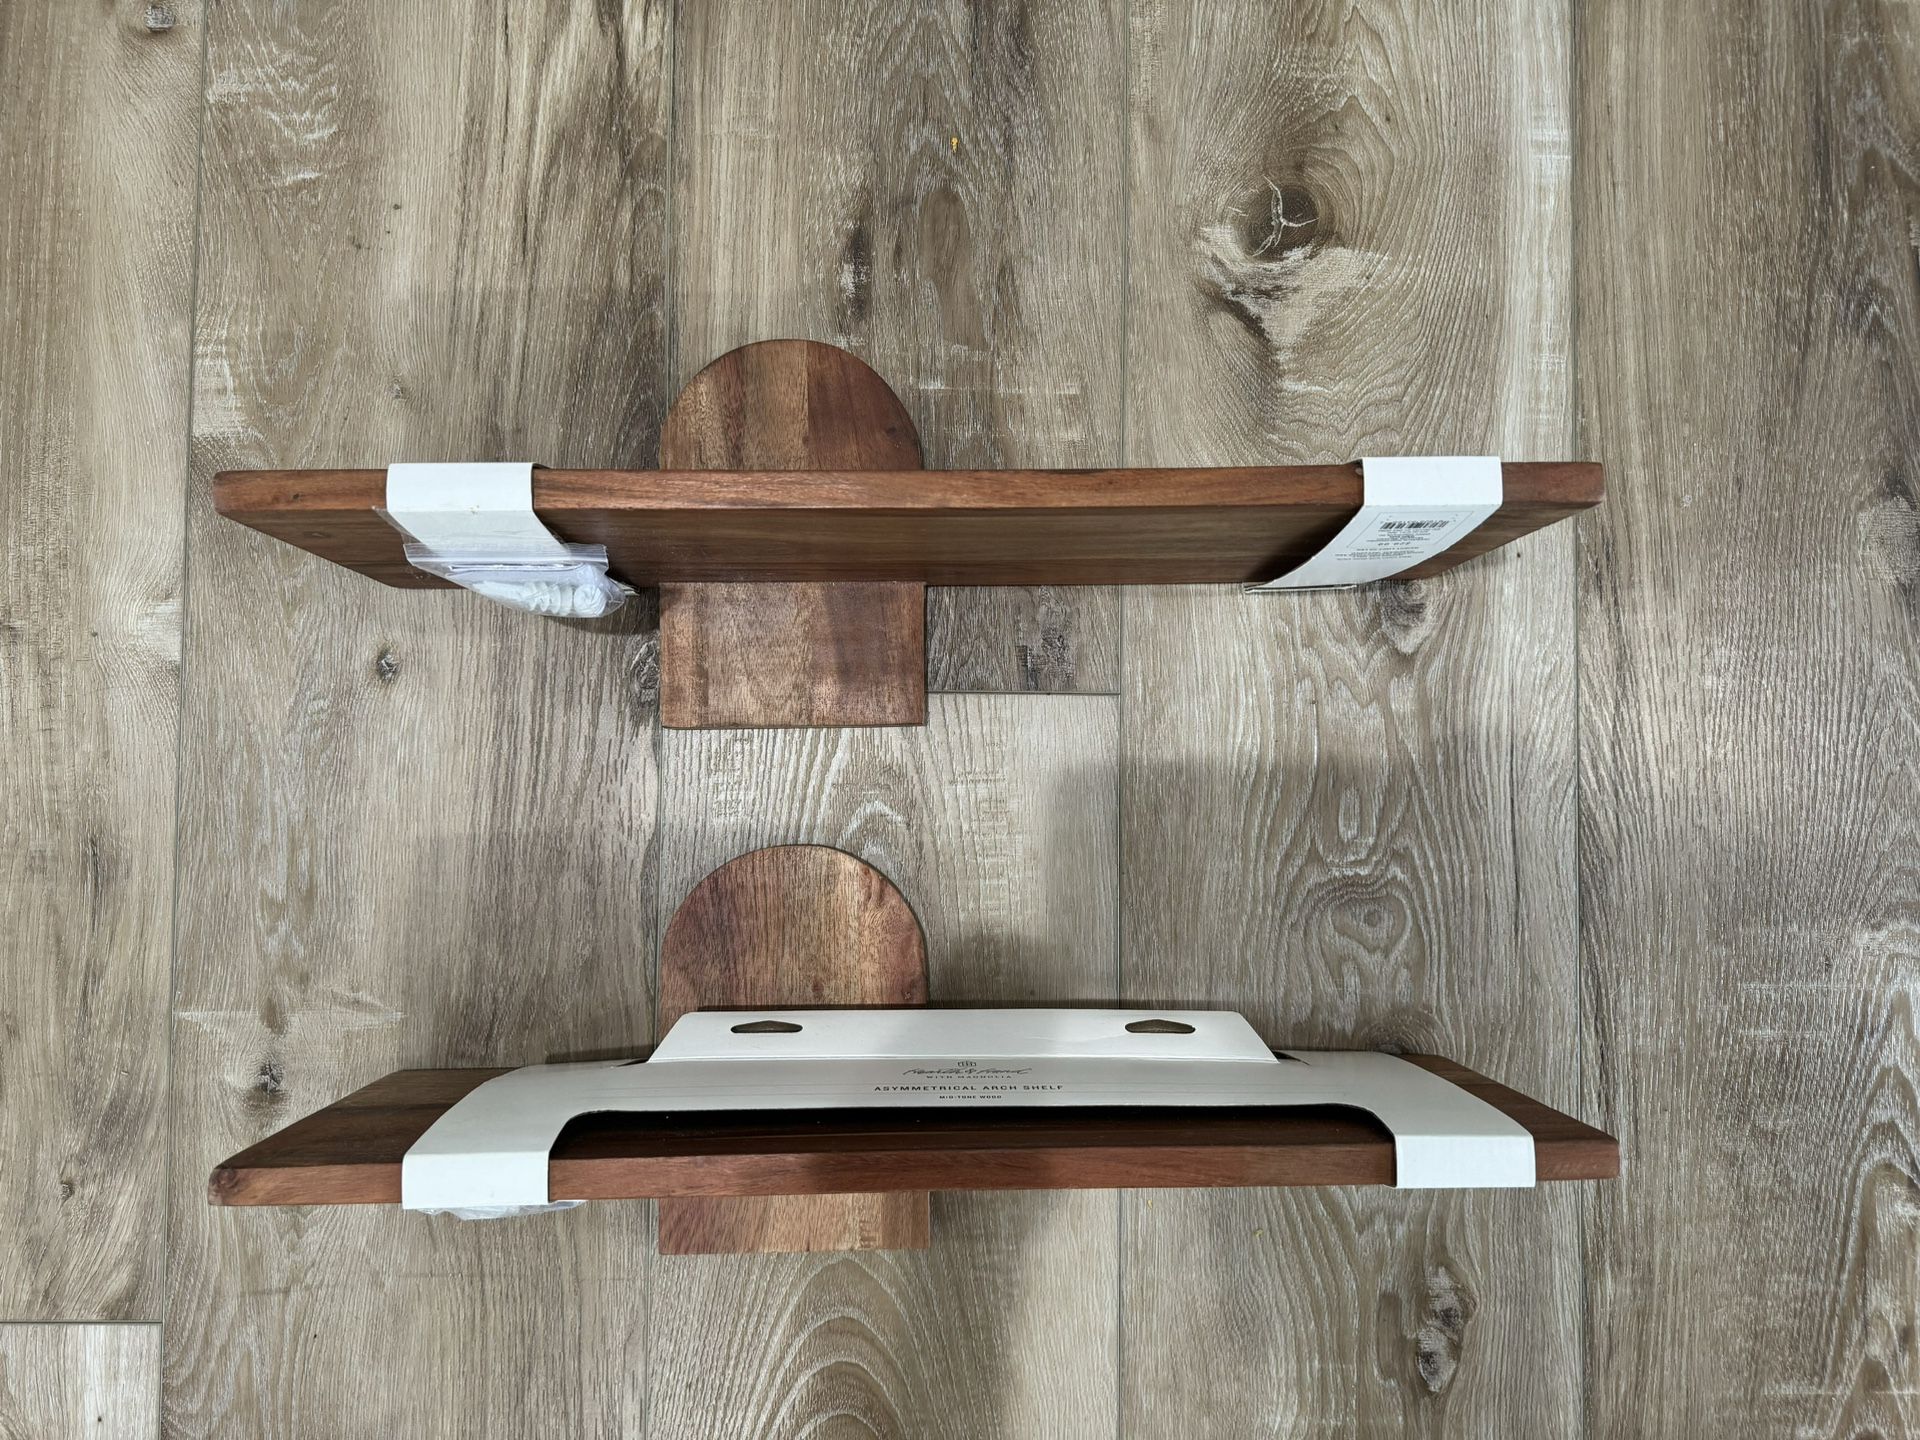 New Hearth & Hand Floating Wood Shelves